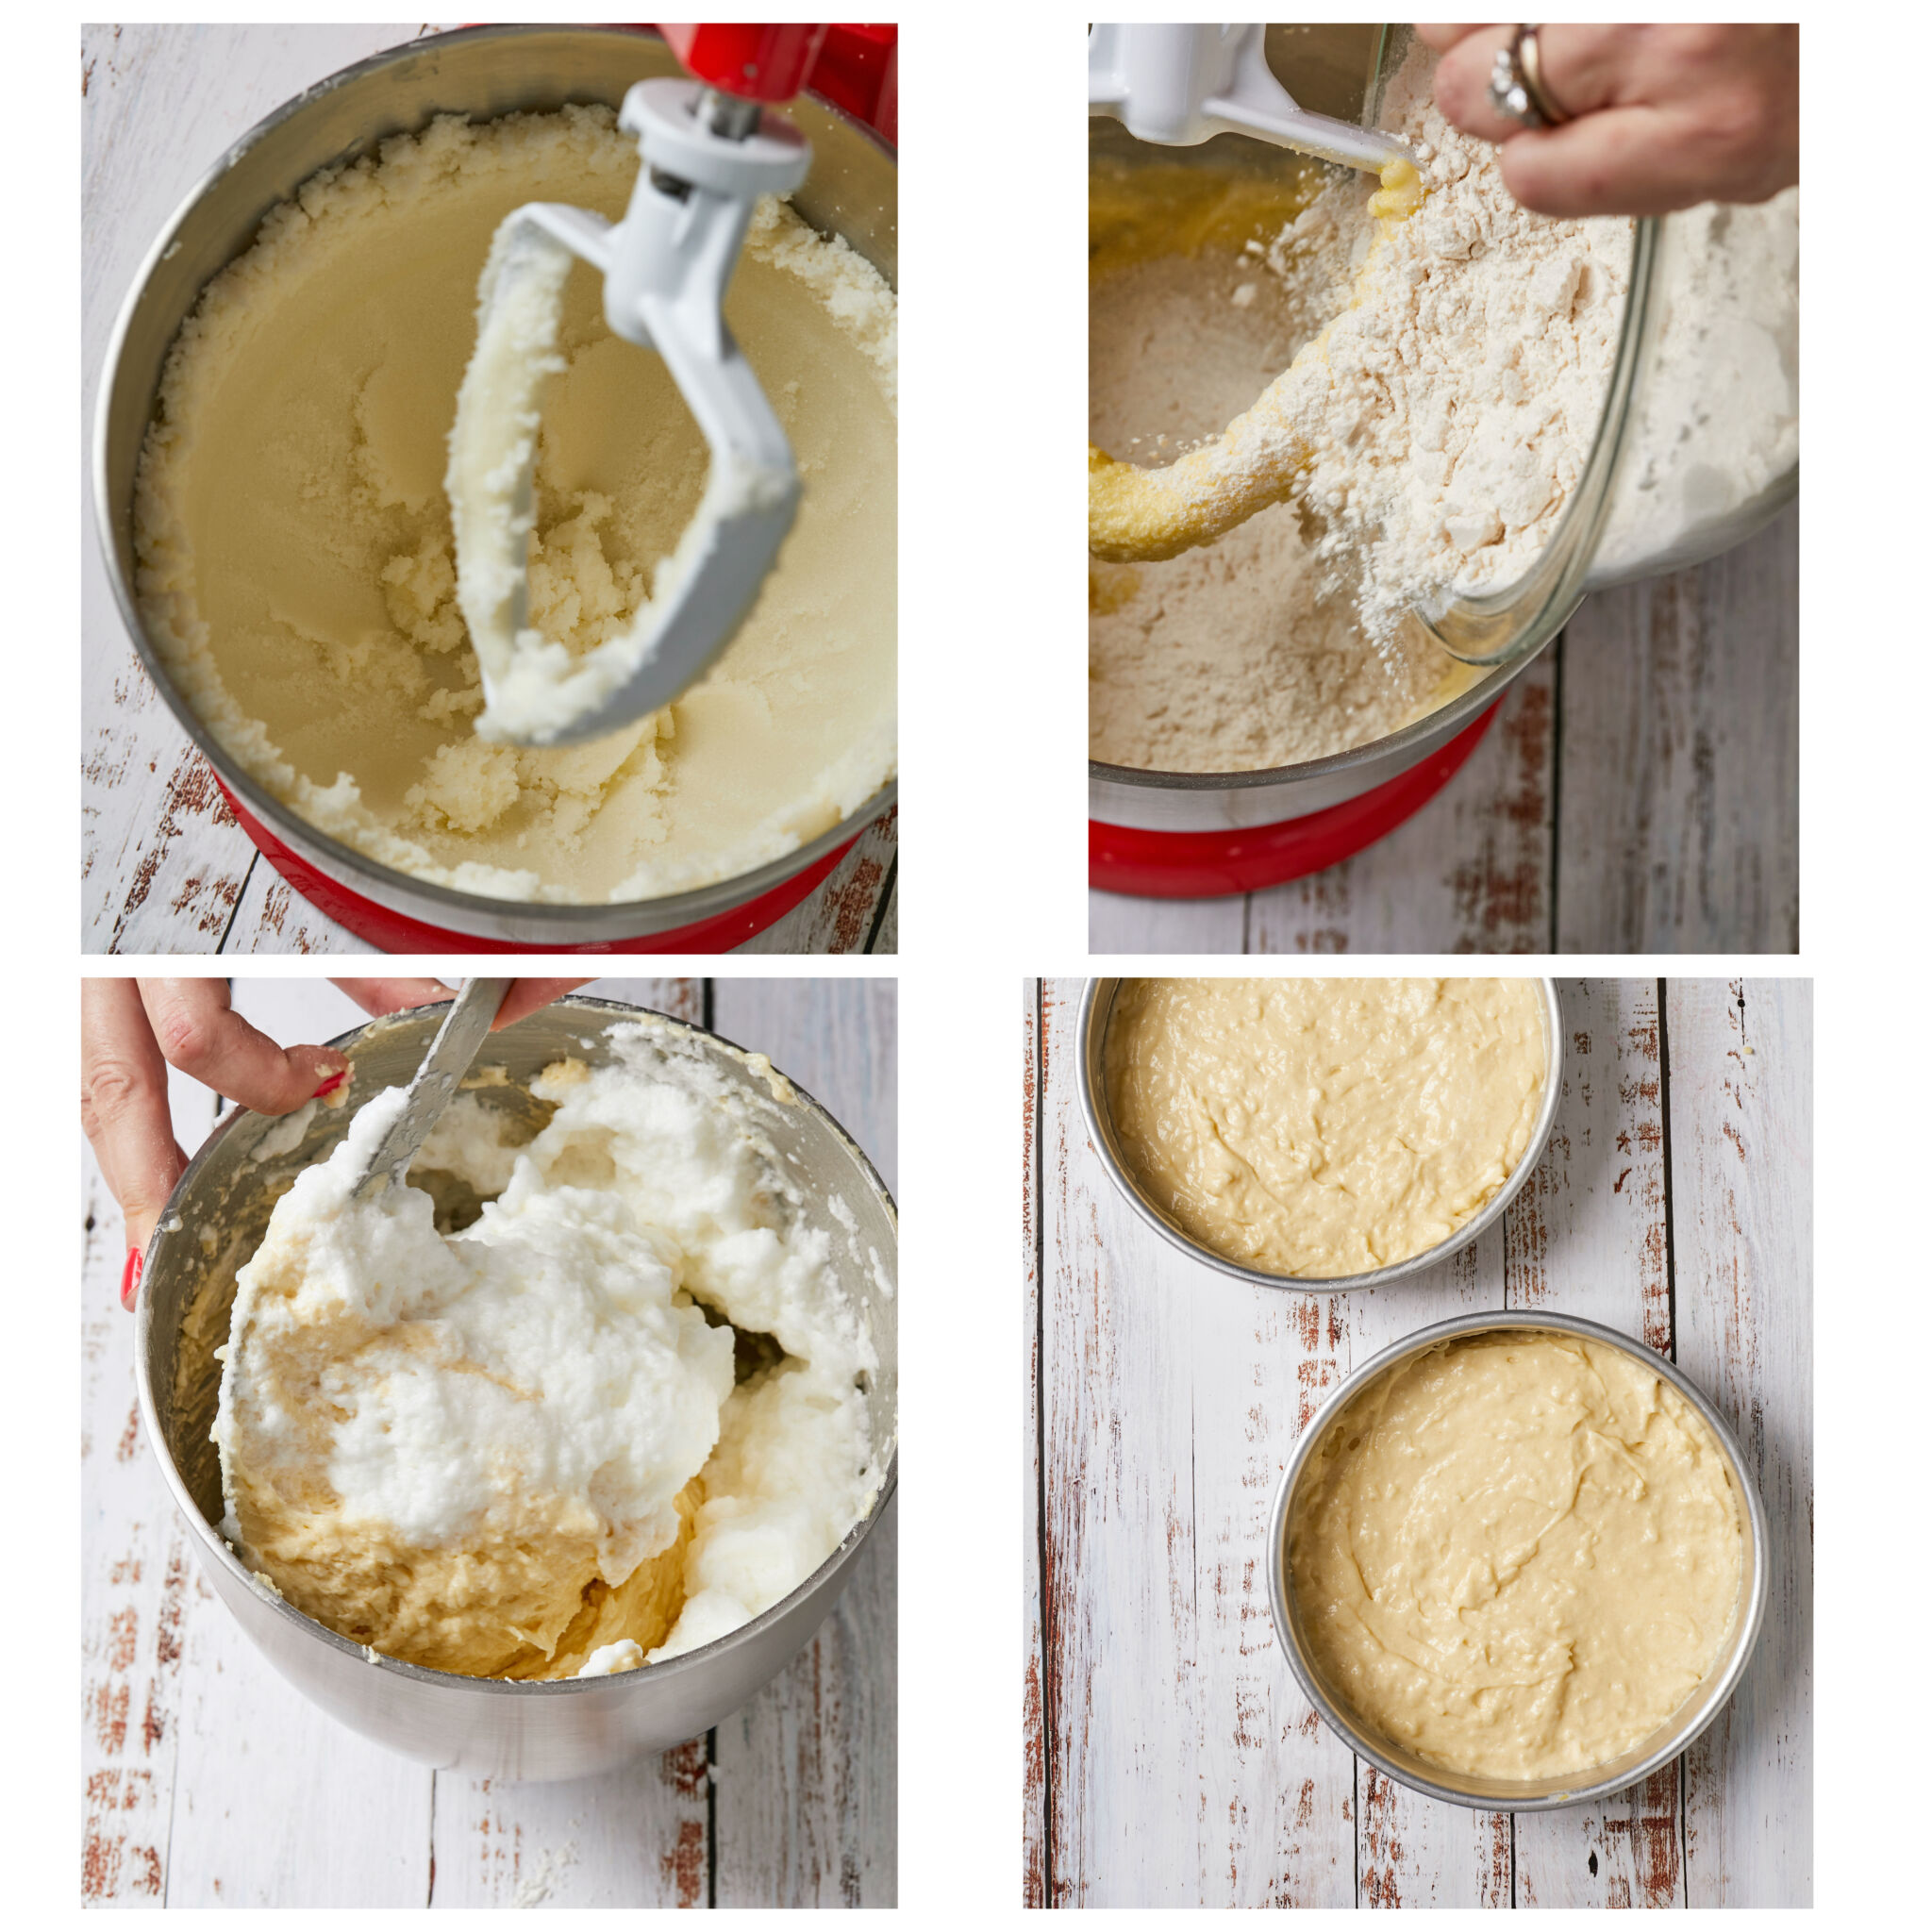 Step-by-step instructions on how to make the batter, first creaming butter and sugar to incorporate air followed by egg yolks one by one, then gradually mix dry ingredients and buttermilk until combined, gently fold in egg whites with a thin-edged metal spoon. Divide batter into two 8-inch round tins. 